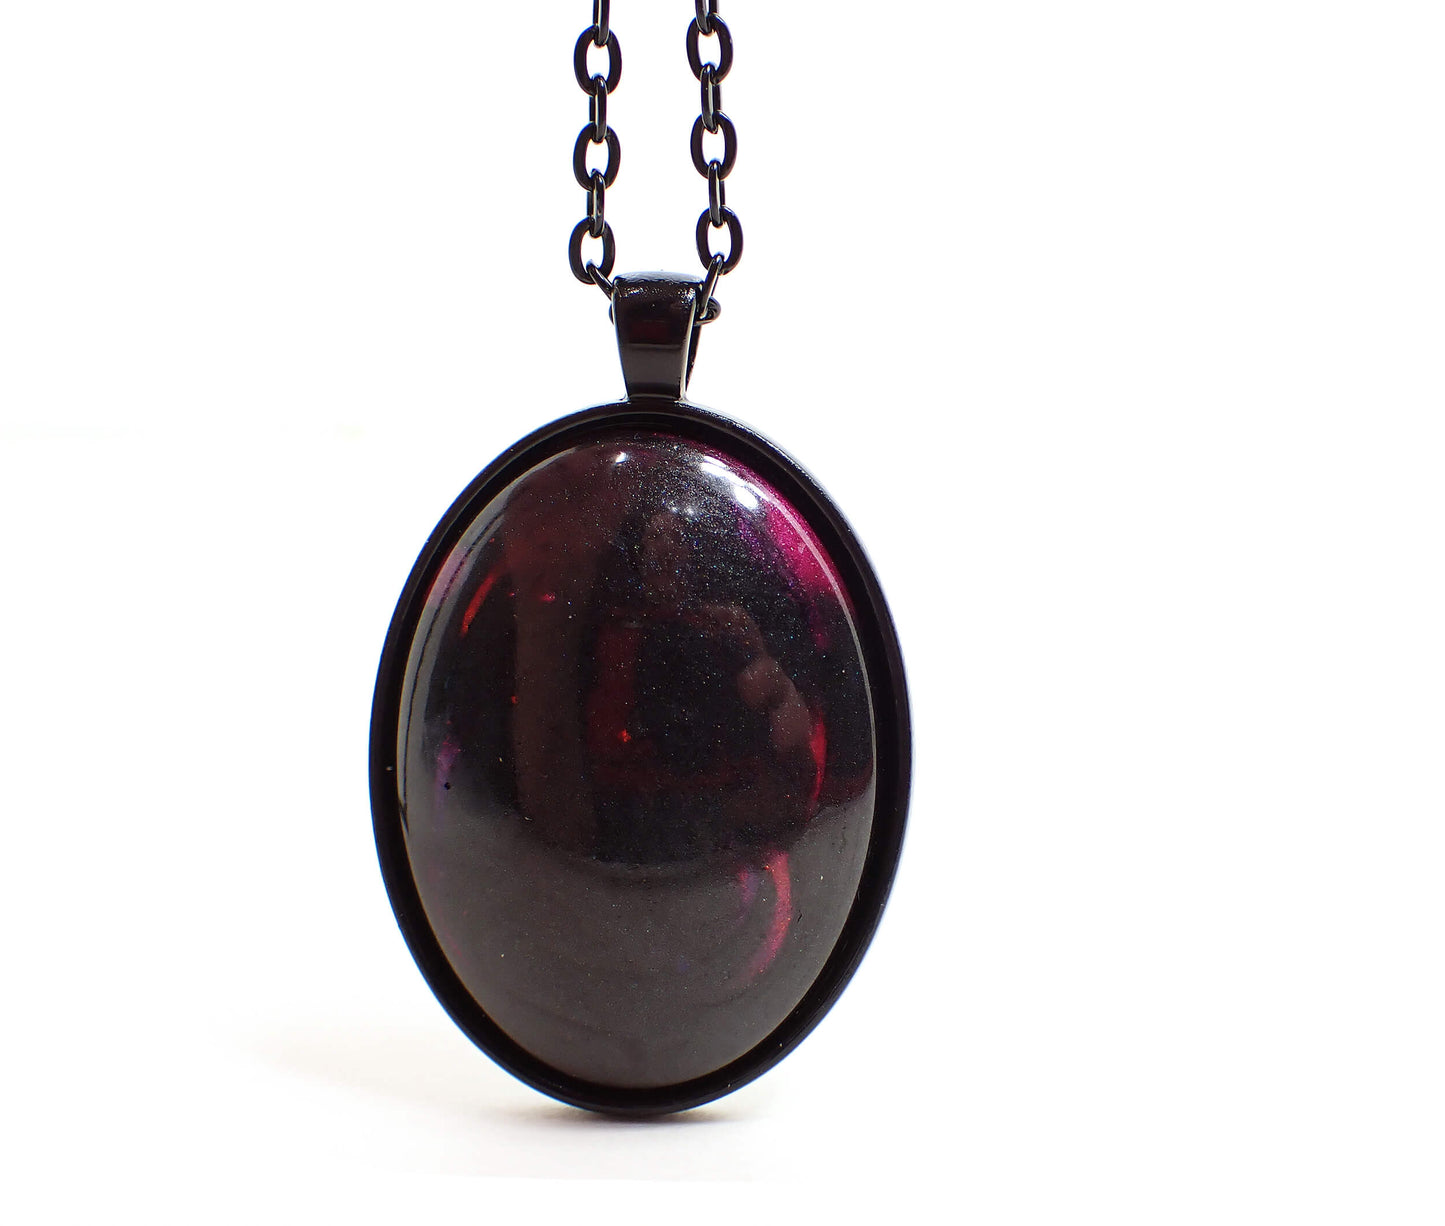 Goth Handmade Resin Large Black Oval Pendant Necklace with a Touch of Color